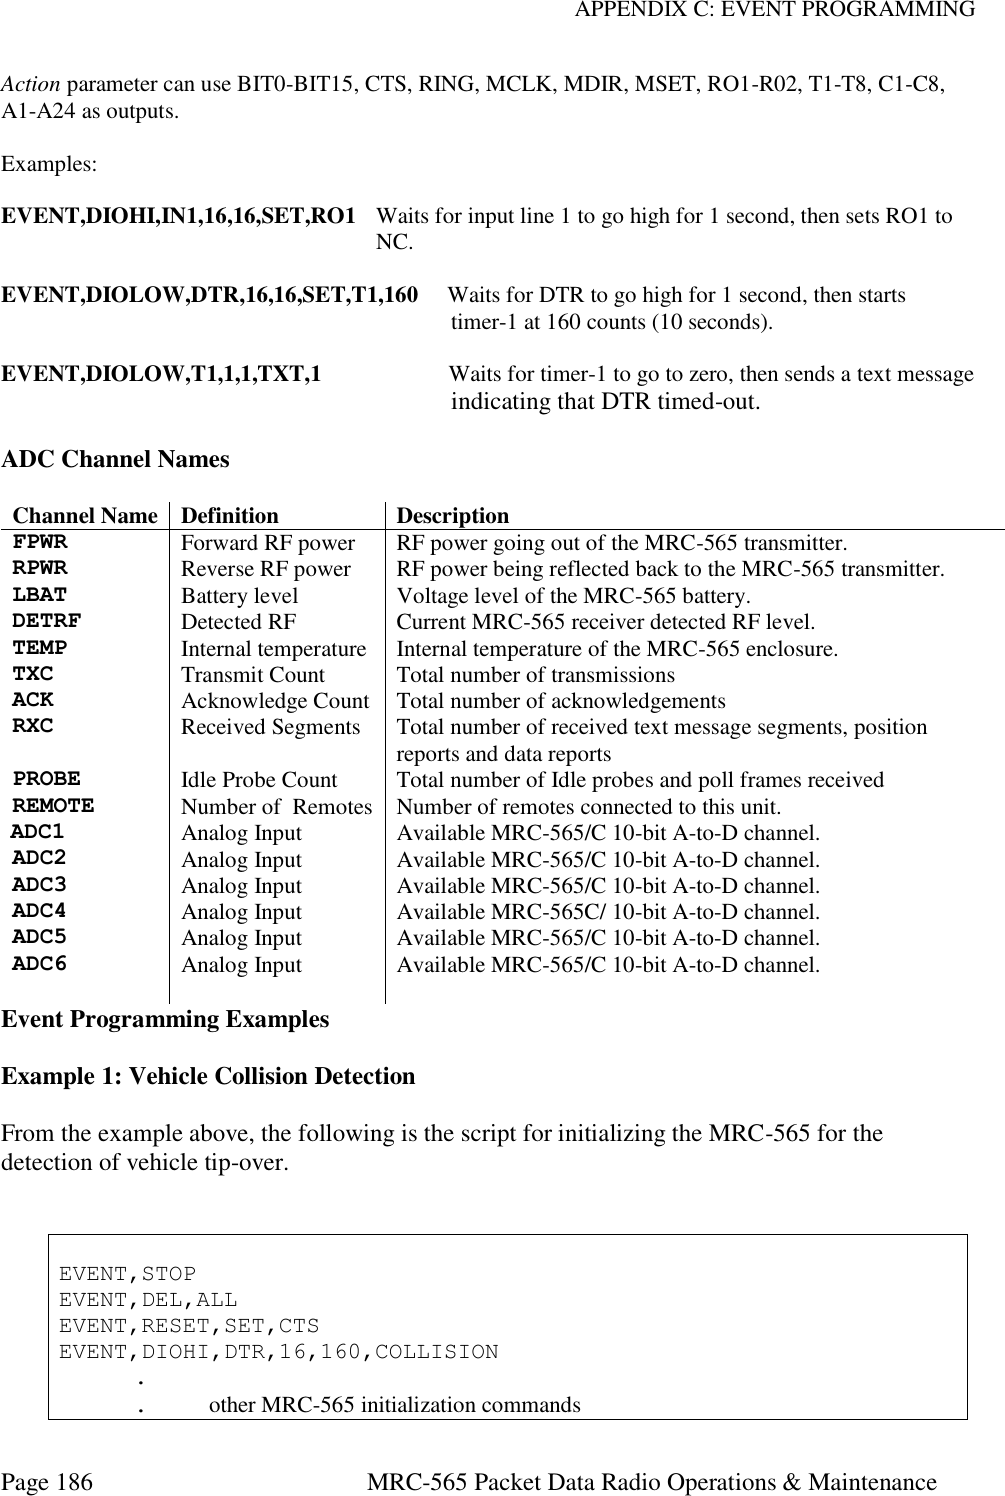 APPENDIX C: EVENT PROGRAMMING Page 186  MRC-565 Packet Data Radio Operations &amp; Maintenance Action parameter can use BIT0-BIT15, CTS, RING, MCLK, MDIR, MSET, RO1-R02, T1-T8, C1-C8, A1-A24 as outputs.  Examples:  EVENT,DIOHI,IN1,16,16,SET,RO1  Waits for input line 1 to go high for 1 second, then sets RO1 to  NC.  EVENT,DIOLOW,DTR,16,16,SET,T1,160     Waits for DTR to go high for 1 second, then starts  timer-1 at 160 counts (10 seconds).  EVENT,DIOLOW,T1,1,1,TXT,1                      Waits for timer-1 to go to zero, then sends a text message                                                                         indicating that DTR timed-out.  ADC Channel Names  Channel Name Definition Description FPWR Forward RF power RF power going out of the MRC-565 transmitter. RPWR Reverse RF power RF power being reflected back to the MRC-565 transmitter. LBAT Battery level Voltage level of the MRC-565 battery. DETRF Detected RF Current MRC-565 receiver detected RF level. TEMP Internal temperature Internal temperature of the MRC-565 enclosure. TXC Transmit Count Total number of transmissions ACK Acknowledge Count Total number of acknowledgements RXC Received Segments Total number of received text message segments, position reports and data reports PROBE Idle Probe Count Total number of Idle probes and poll frames received REMOTE Number of  Remotes Number of remotes connected to this unit. ADC1 Analog Input Available MRC-565/C 10-bit A-to-D channel. ADC2 Analog Input Available MRC-565/C 10-bit A-to-D channel. ADC3 Analog Input Available MRC-565/C 10-bit A-to-D channel. ADC4 Analog Input Available MRC-565C/ 10-bit A-to-D channel. ADC5 Analog Input Available MRC-565/C 10-bit A-to-D channel. ADC6 Analog Input Available MRC-565/C 10-bit A-to-D channel.  Event Programming Examples  Example 1: Vehicle Collision Detection  From the example above, the following is the script for initializing the MRC-565 for the detection of vehicle tip-over.    EVENT,STOP EVENT,DEL,ALL EVENT,RESET,SET,CTS EVENT,DIOHI,DTR,16,160,COLLISION   .   .  other MRC-565 initialization commands 